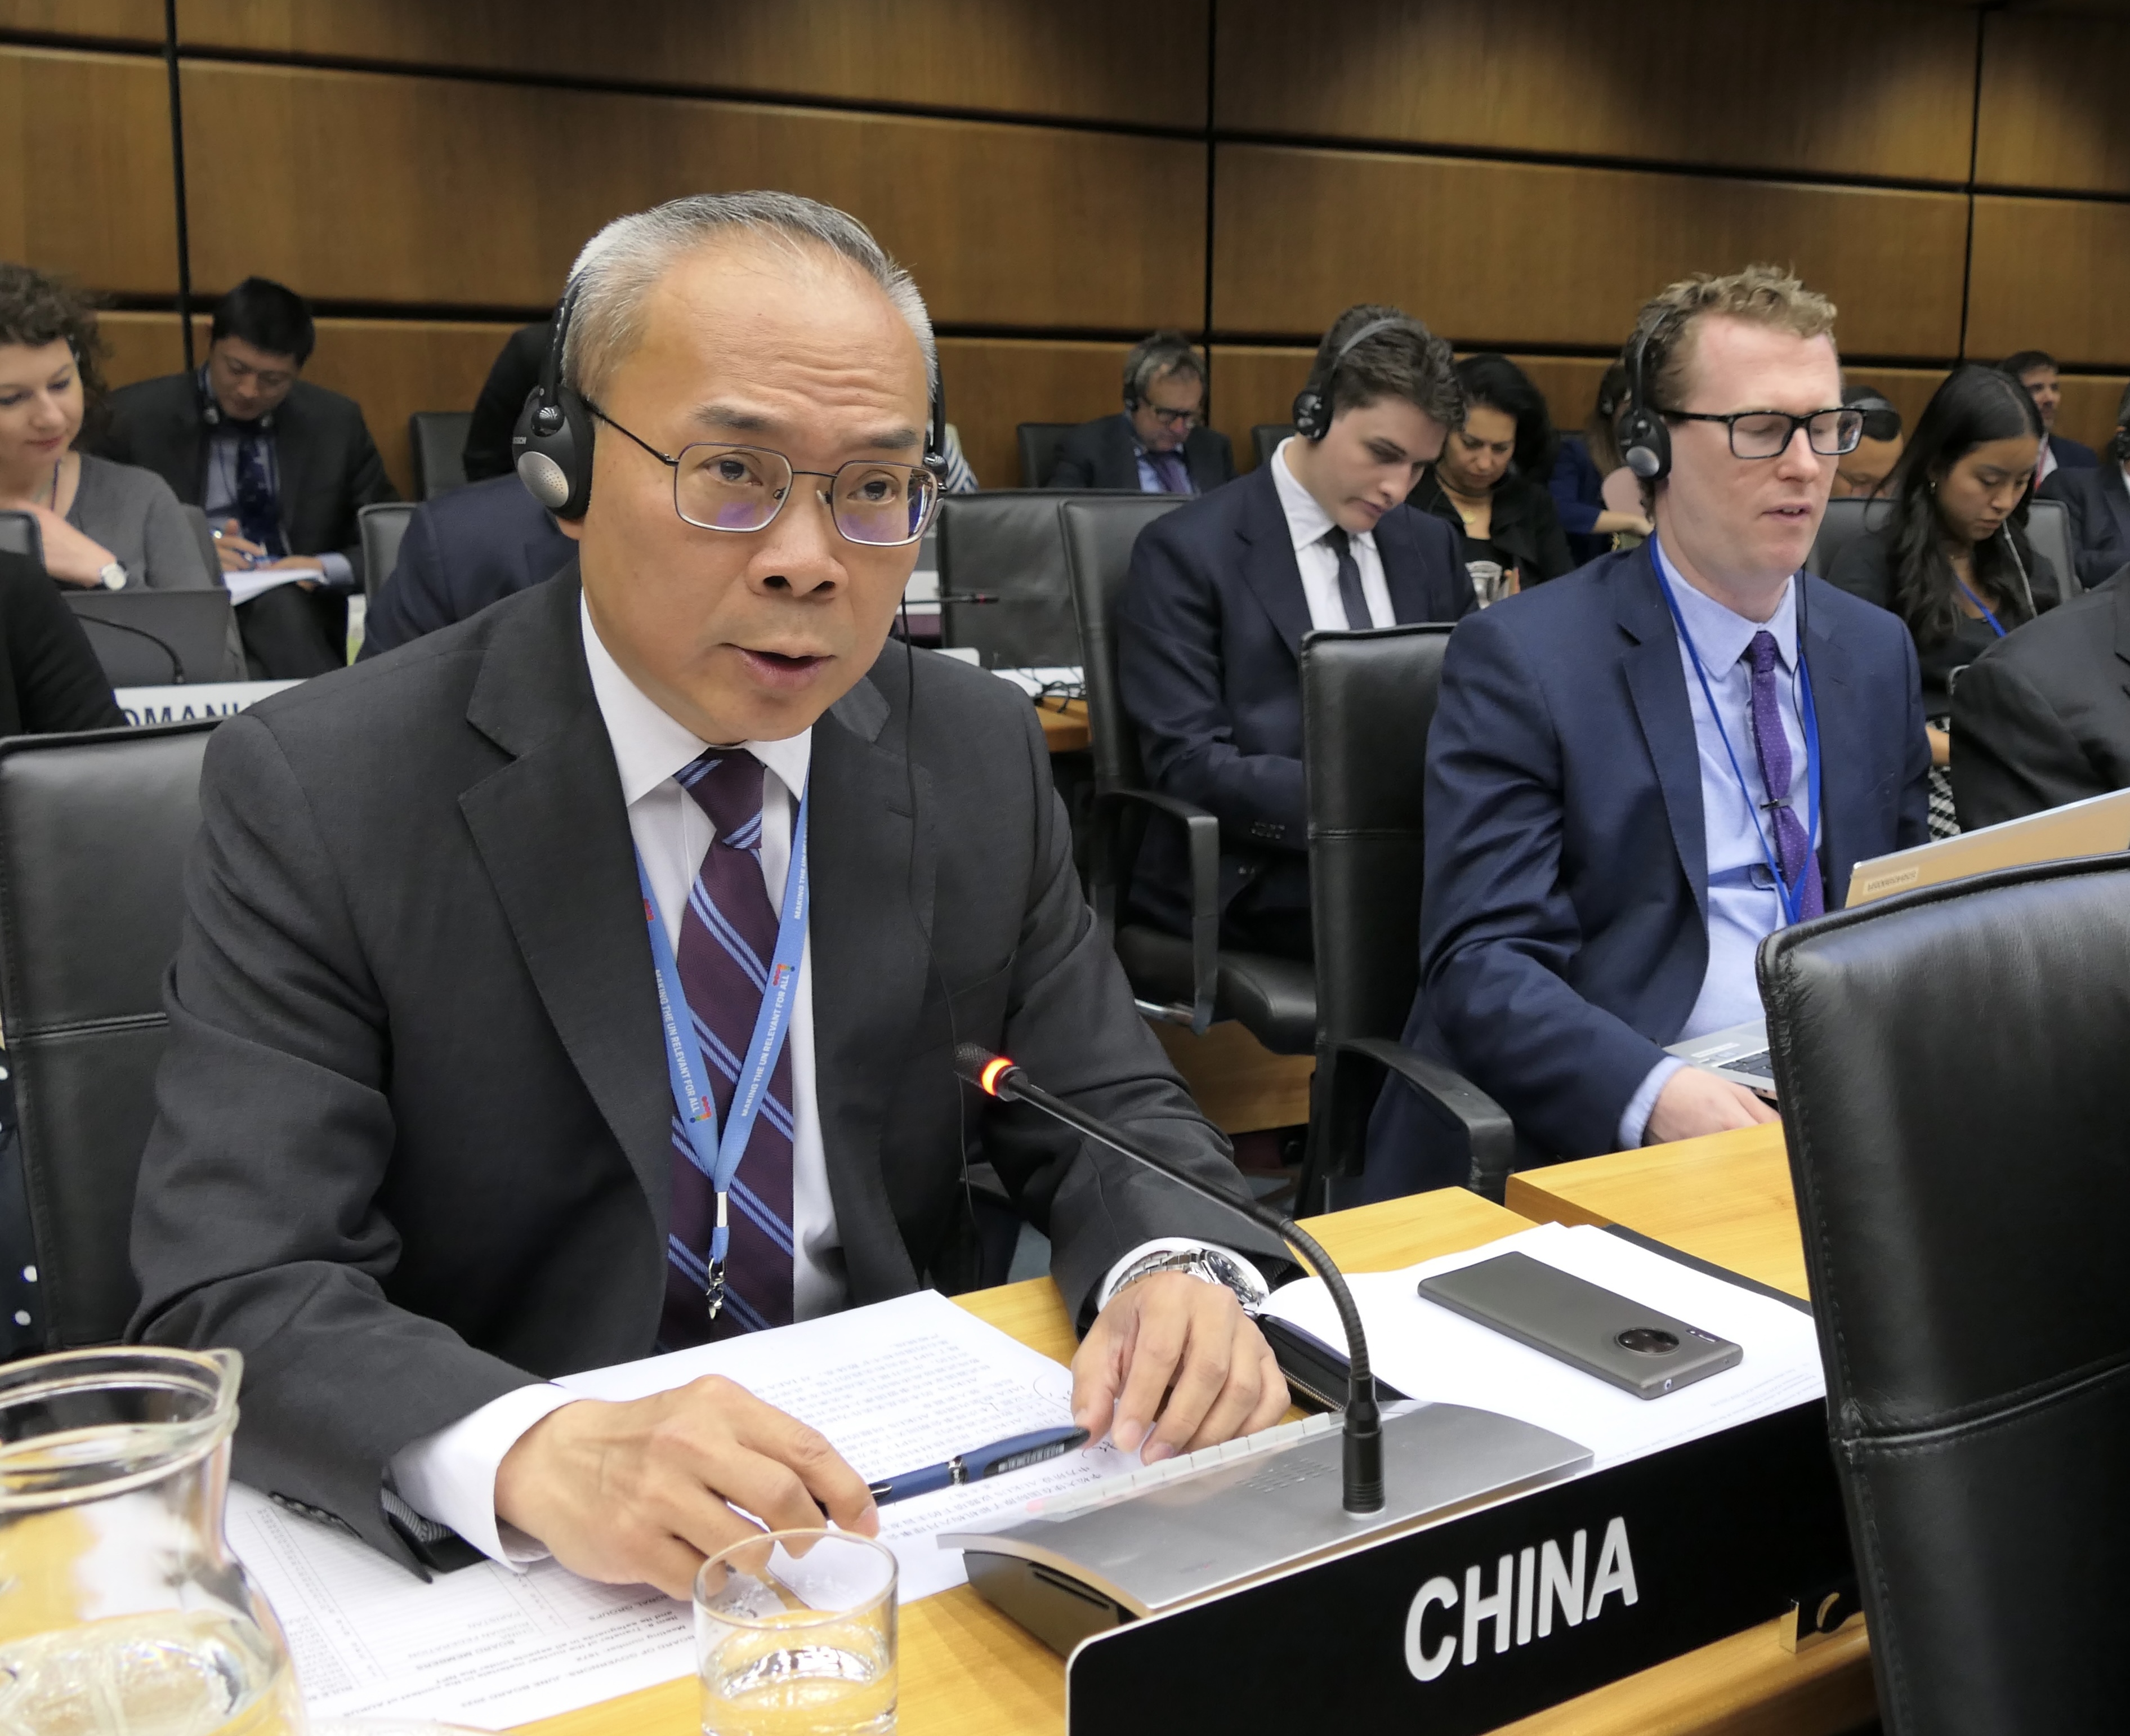 Li Song, China's permanent representative to the UN and other international organizations in Vienna, addresses a regular June meeting convened by the IAEA in Vienna, Austria, June 8, 2023. /via China's permanent mission to the UN and other international organizations in Vienna 